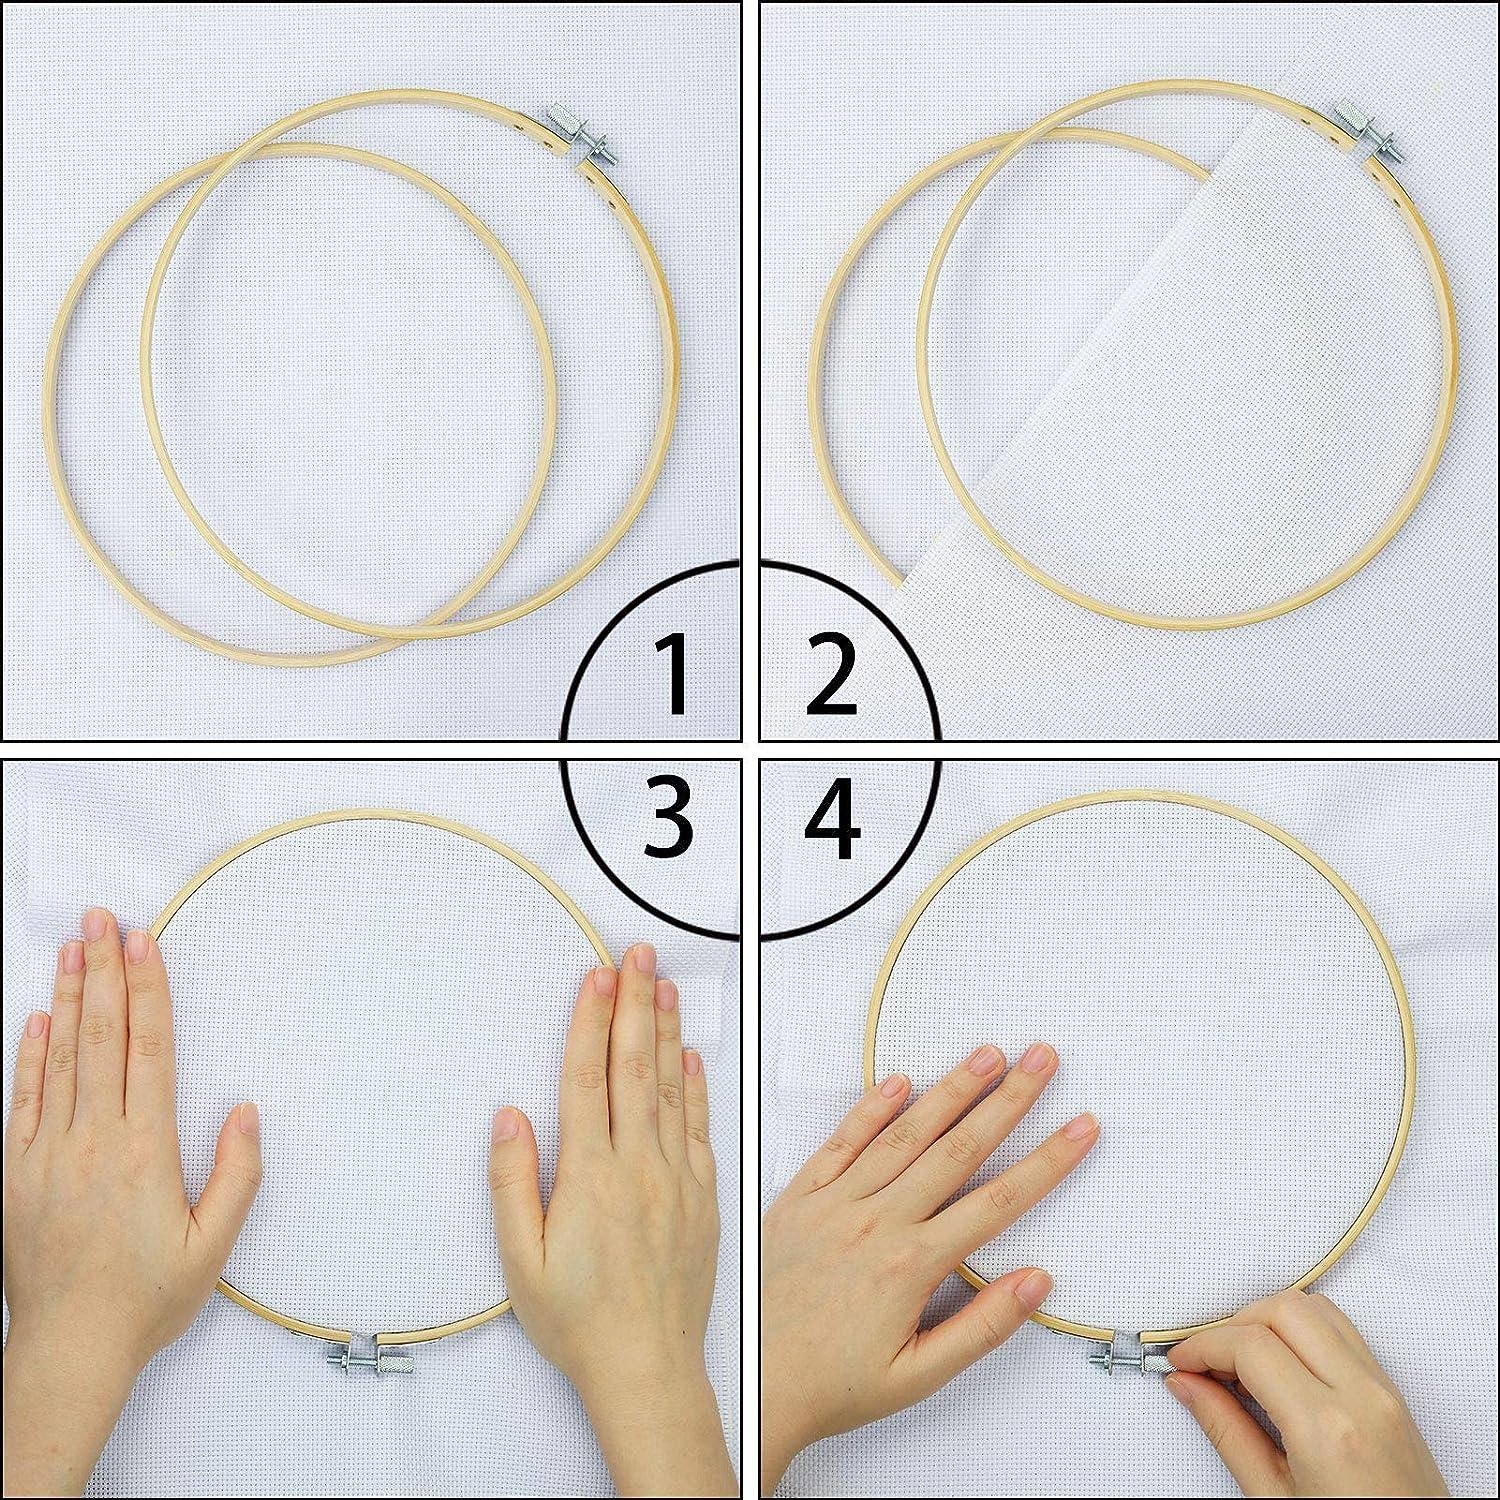  Similane 5 Pieces Embroidery Hoops Bamboo Circle Cross Stitch  Hoop Ring 5 inch to 10 inch for Embroidery and Cross Stitch